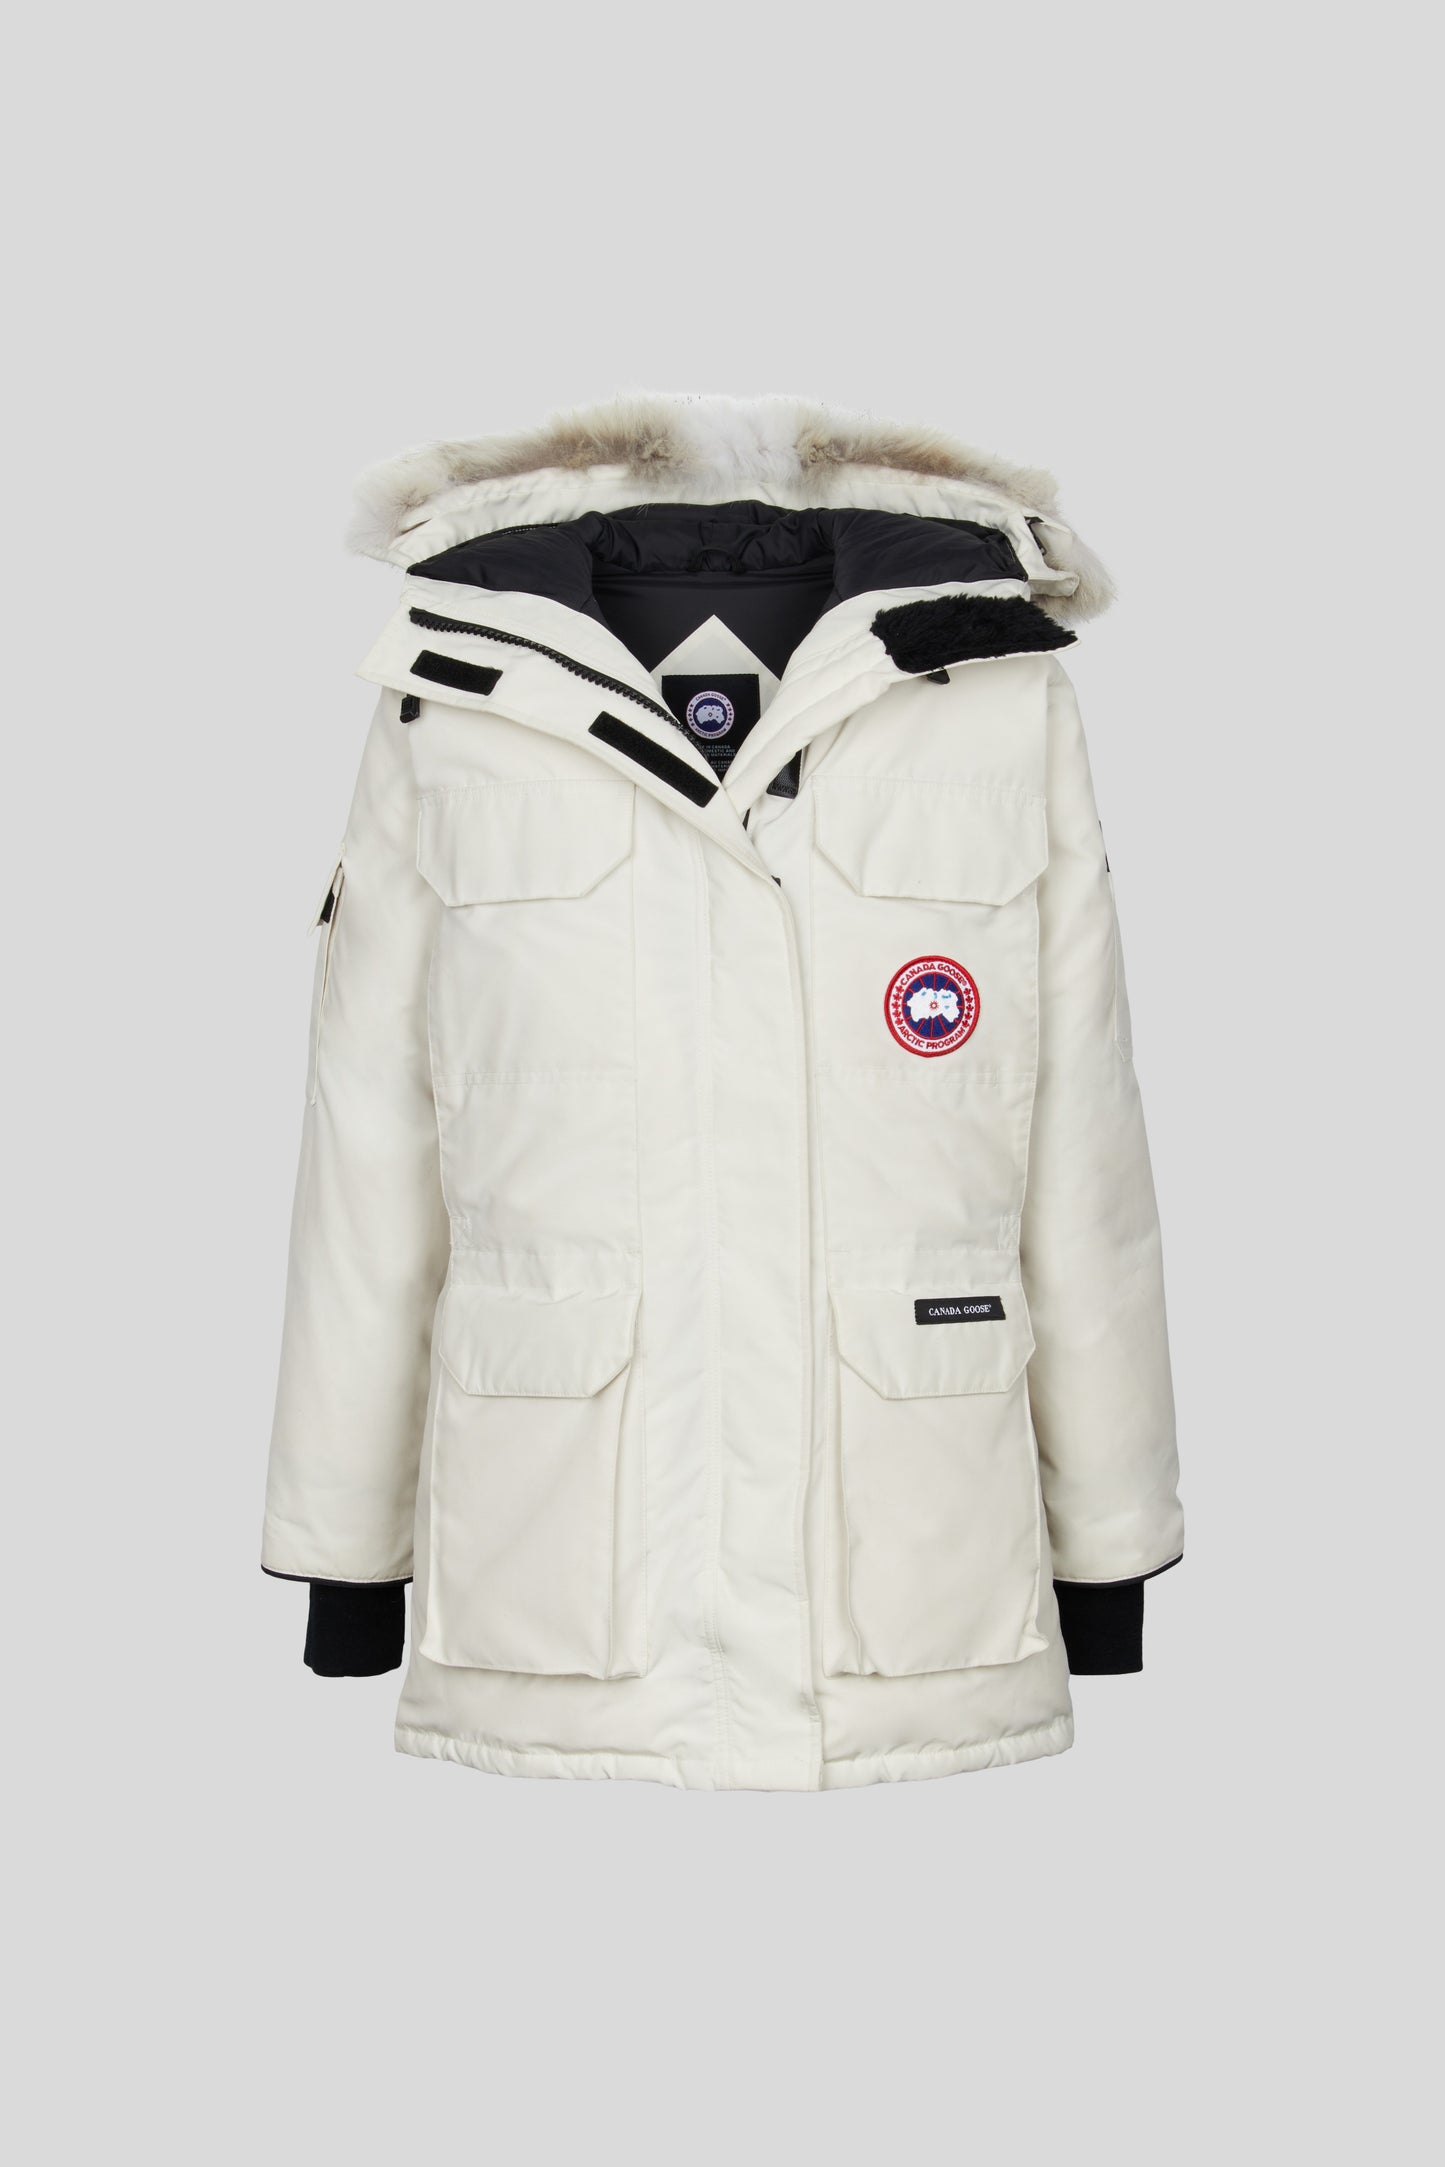 Women's Expedition Parka